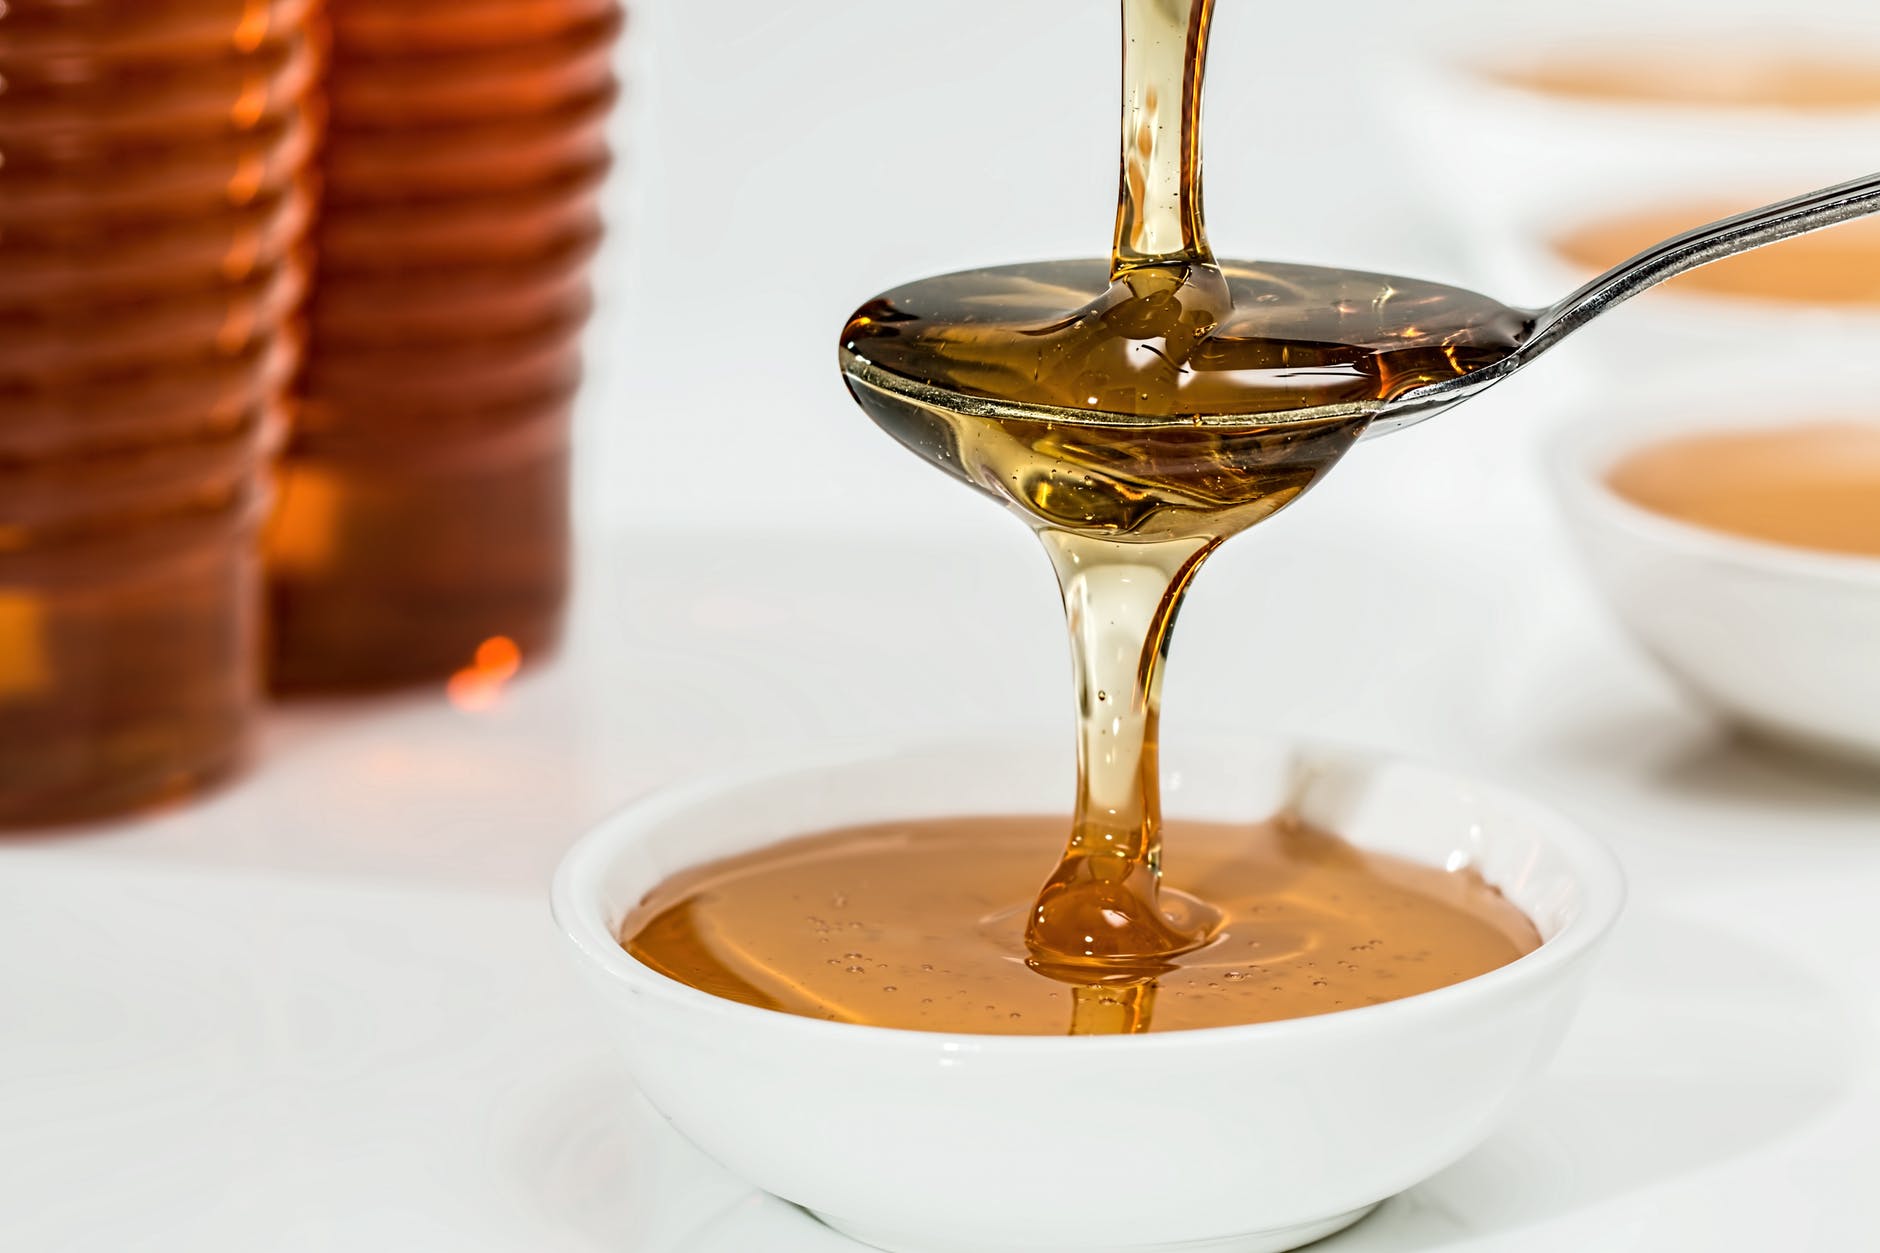 Are Hungary’s Thousand-Year-Old Honey Farming Traditions Under Threat from 